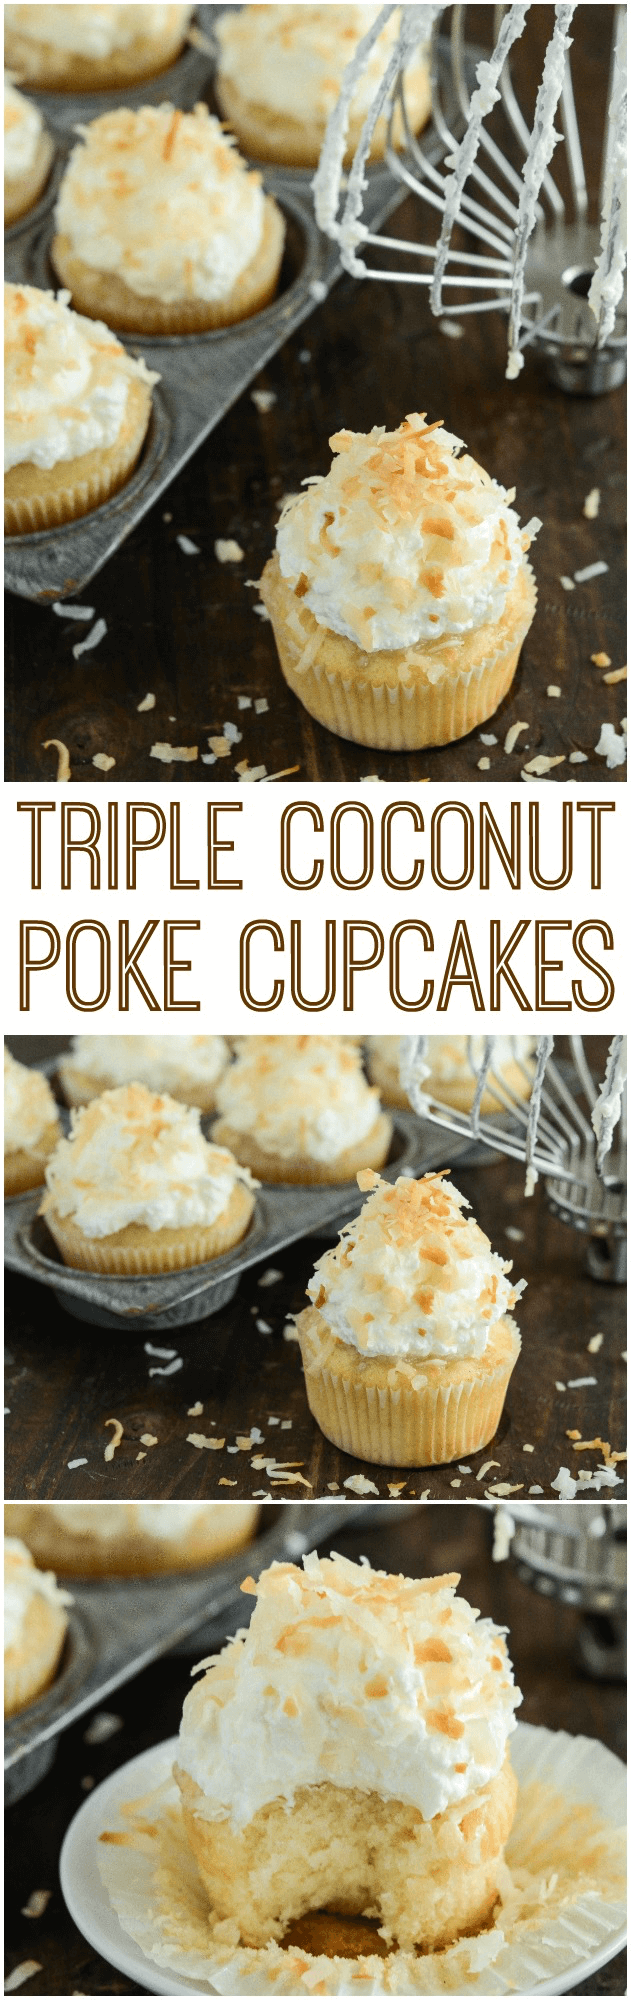 Photo collage of Triple Coconut Poke Cupcakes piled high with whipped cream and shredded coconut